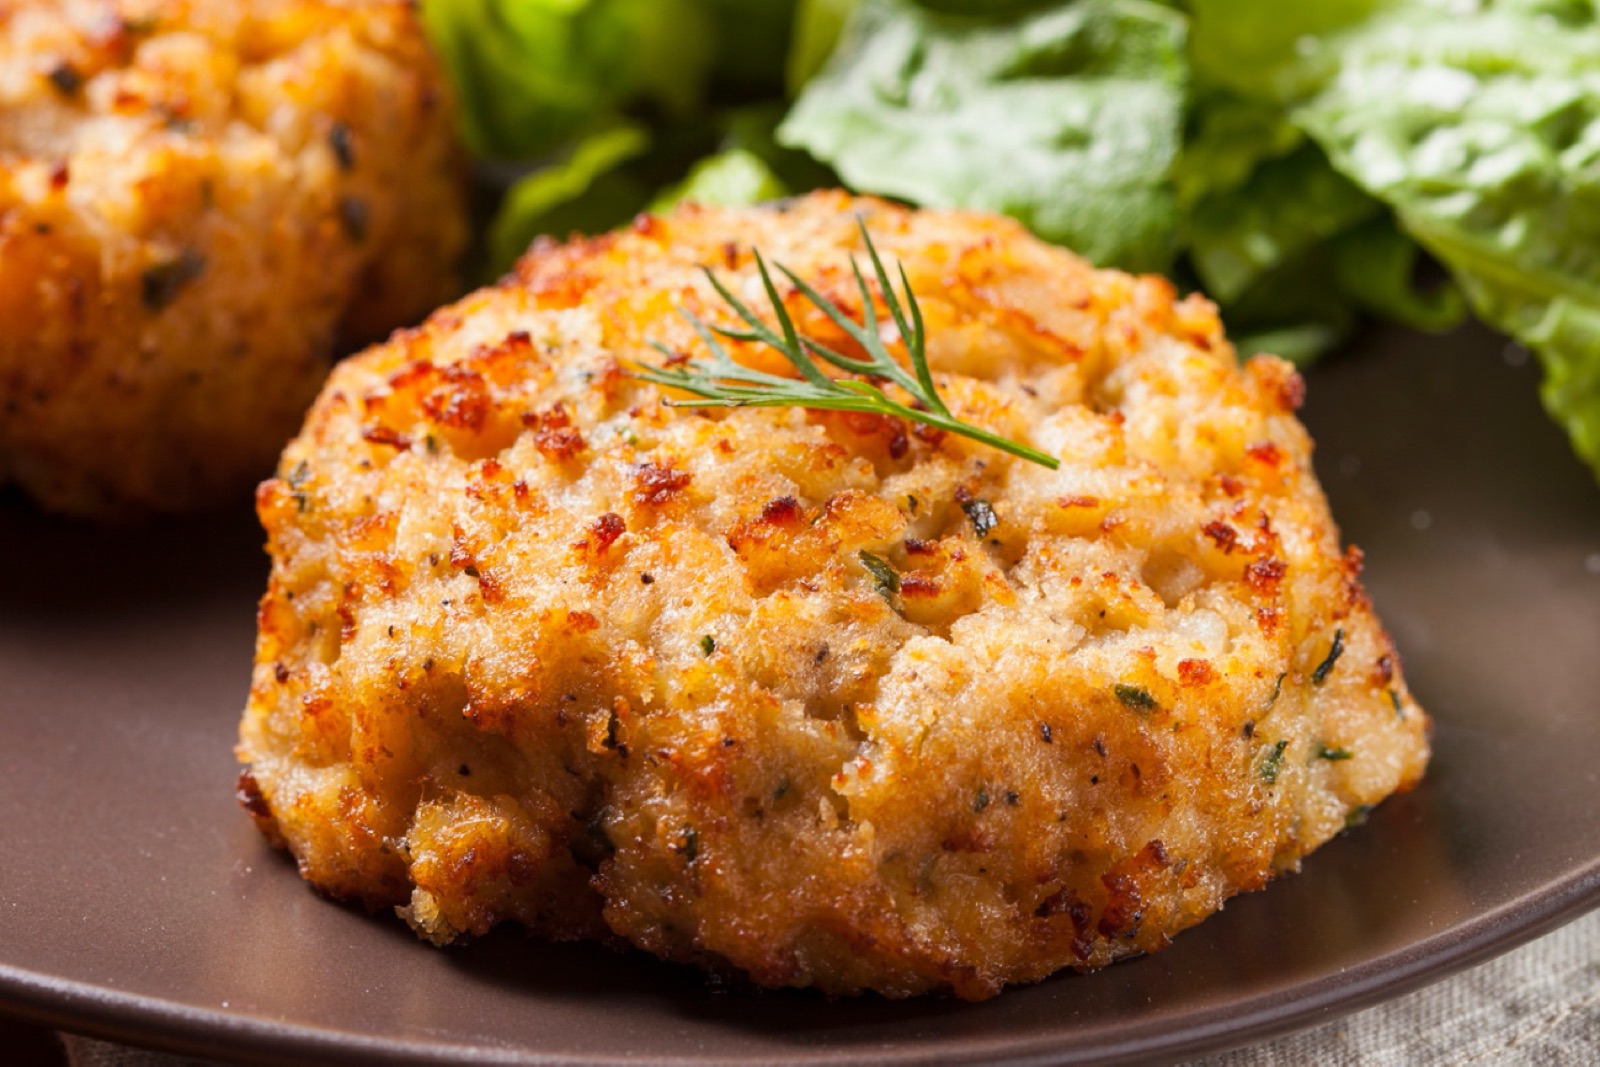 🍤 Can We Guess Your Age and Gender Based on the Seafood Dishes You’ve Eaten? Organic Homemade Crab Cakes